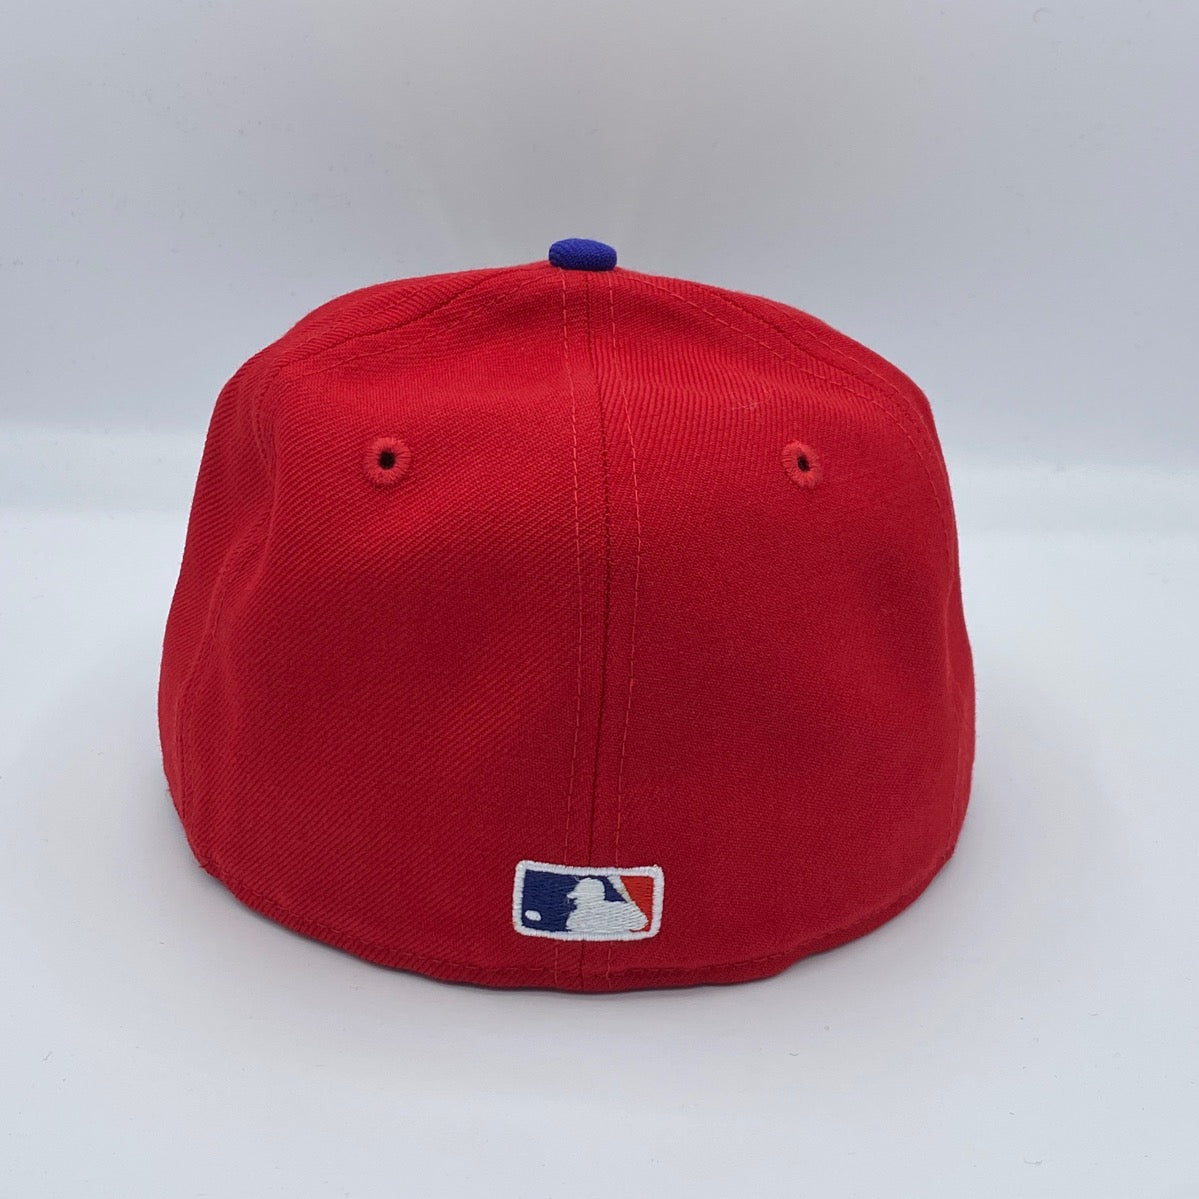 Philadelphia Phillies Authentic Collection 59FIFTY New Era Red